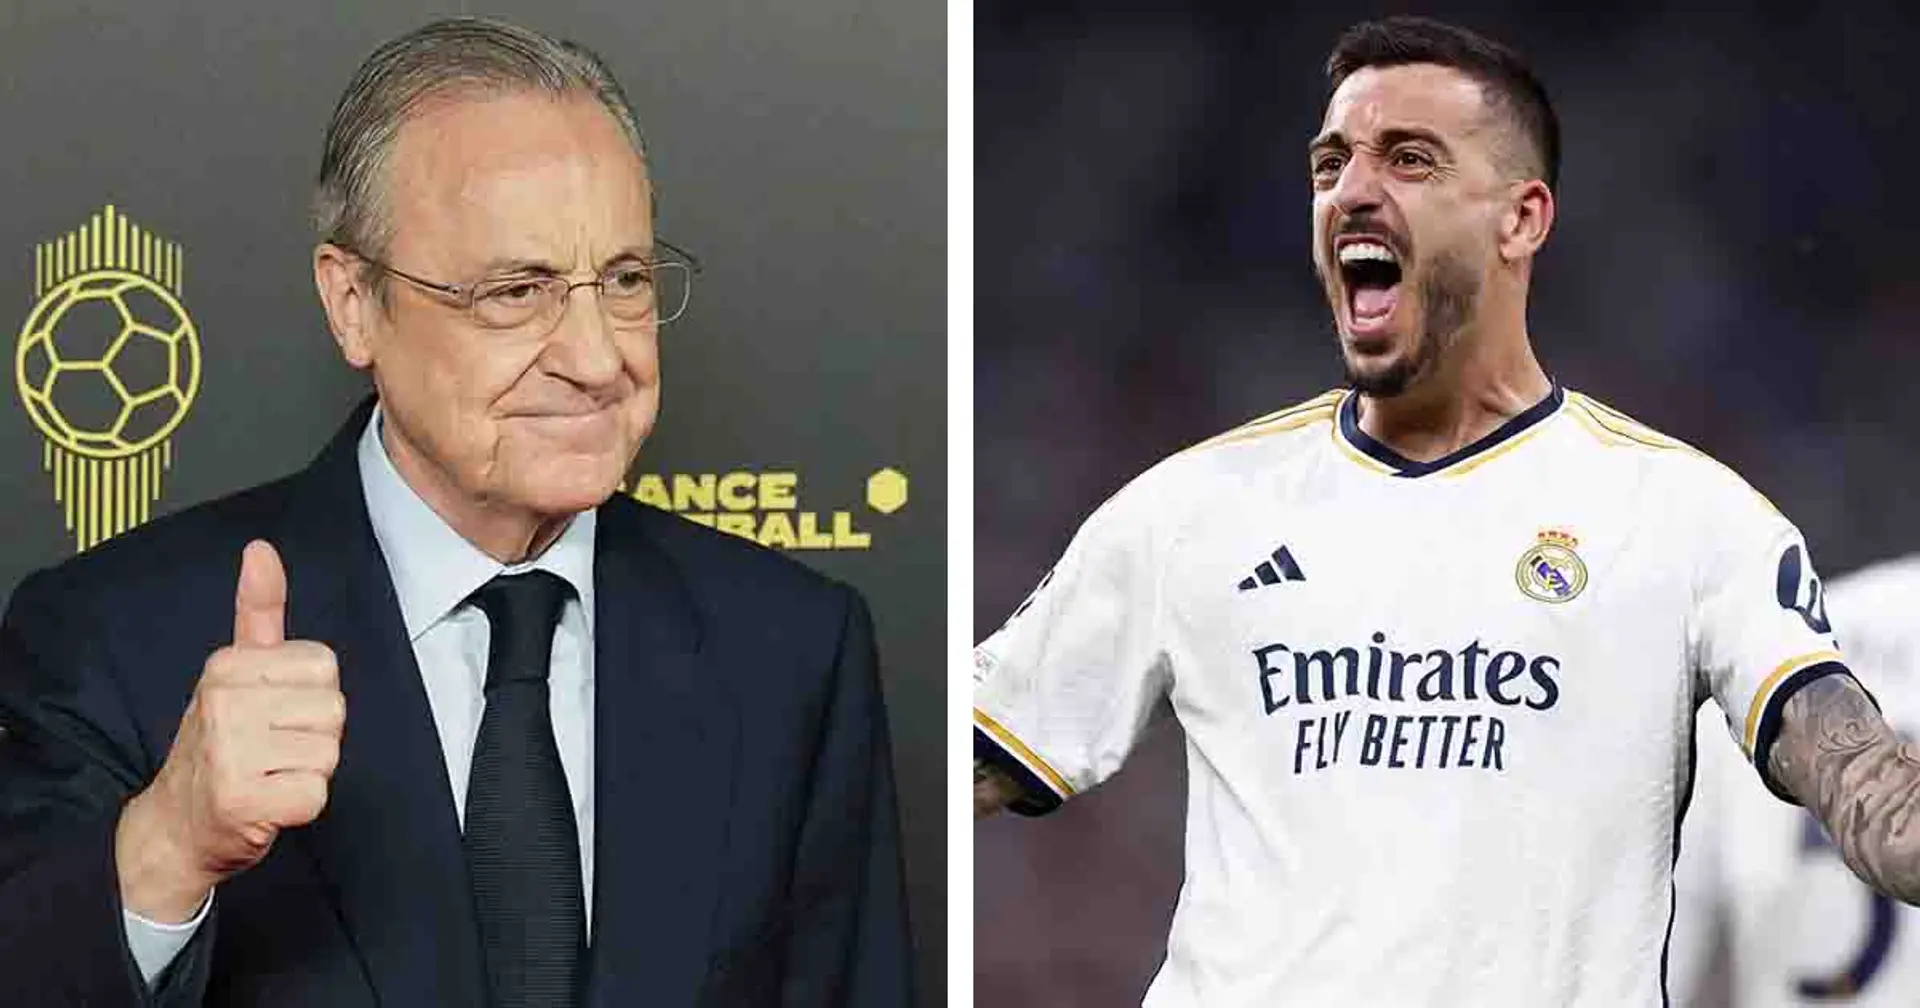 Revealed: Real Madrid's plans for Joselu after Champions League heroics (reliability: 4 stars)